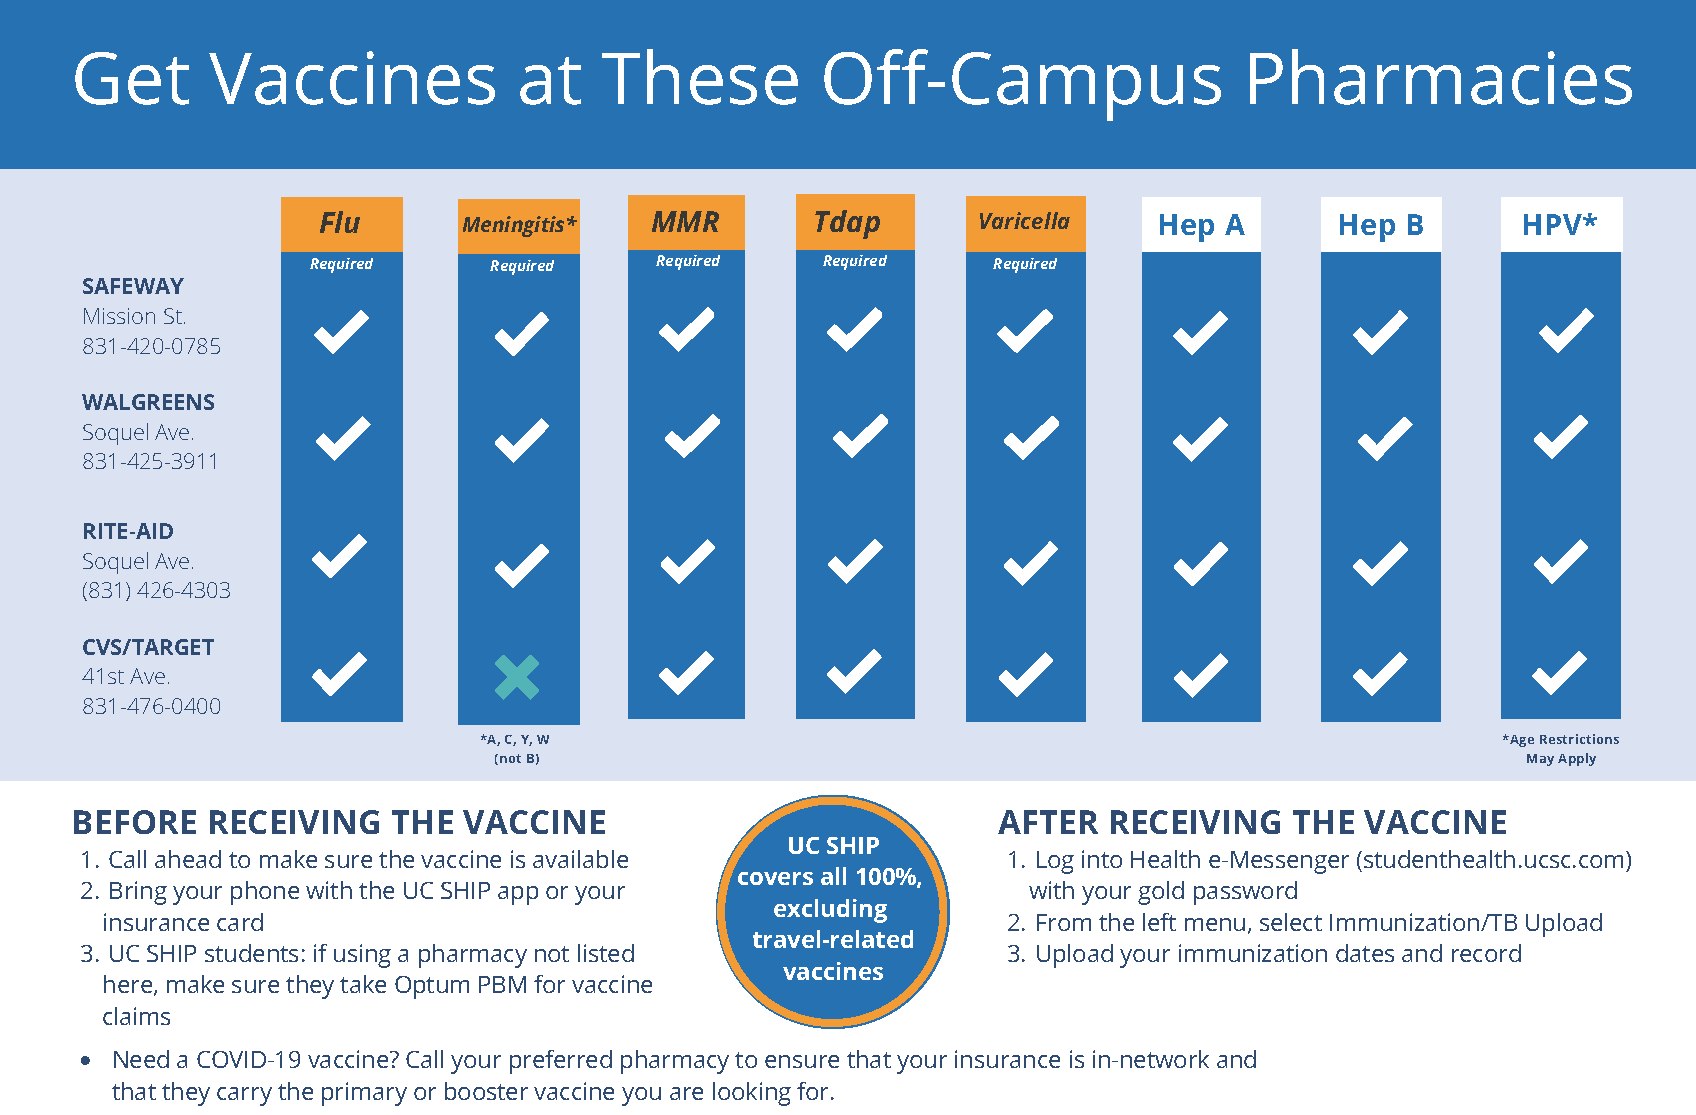 Additional info about off-campus pharmacies: Before Receiving the Vaccine: Call ahead to make sure the vaccine is available. Bring your phone with the UC SHIP app or your insurance card. UC SHIP students: if using a pharmacy not listed here, make sure they take Optum PBM for vaccine claims. After Receiving the Vaccine: Log into Health e-Messenger (studenthealth.ucsc.com) with your gold password. From the left menu, select Immunization/TB Upload Upload your immunization record. UC SHIP covers all 100%, excluding travel-related vaccines.